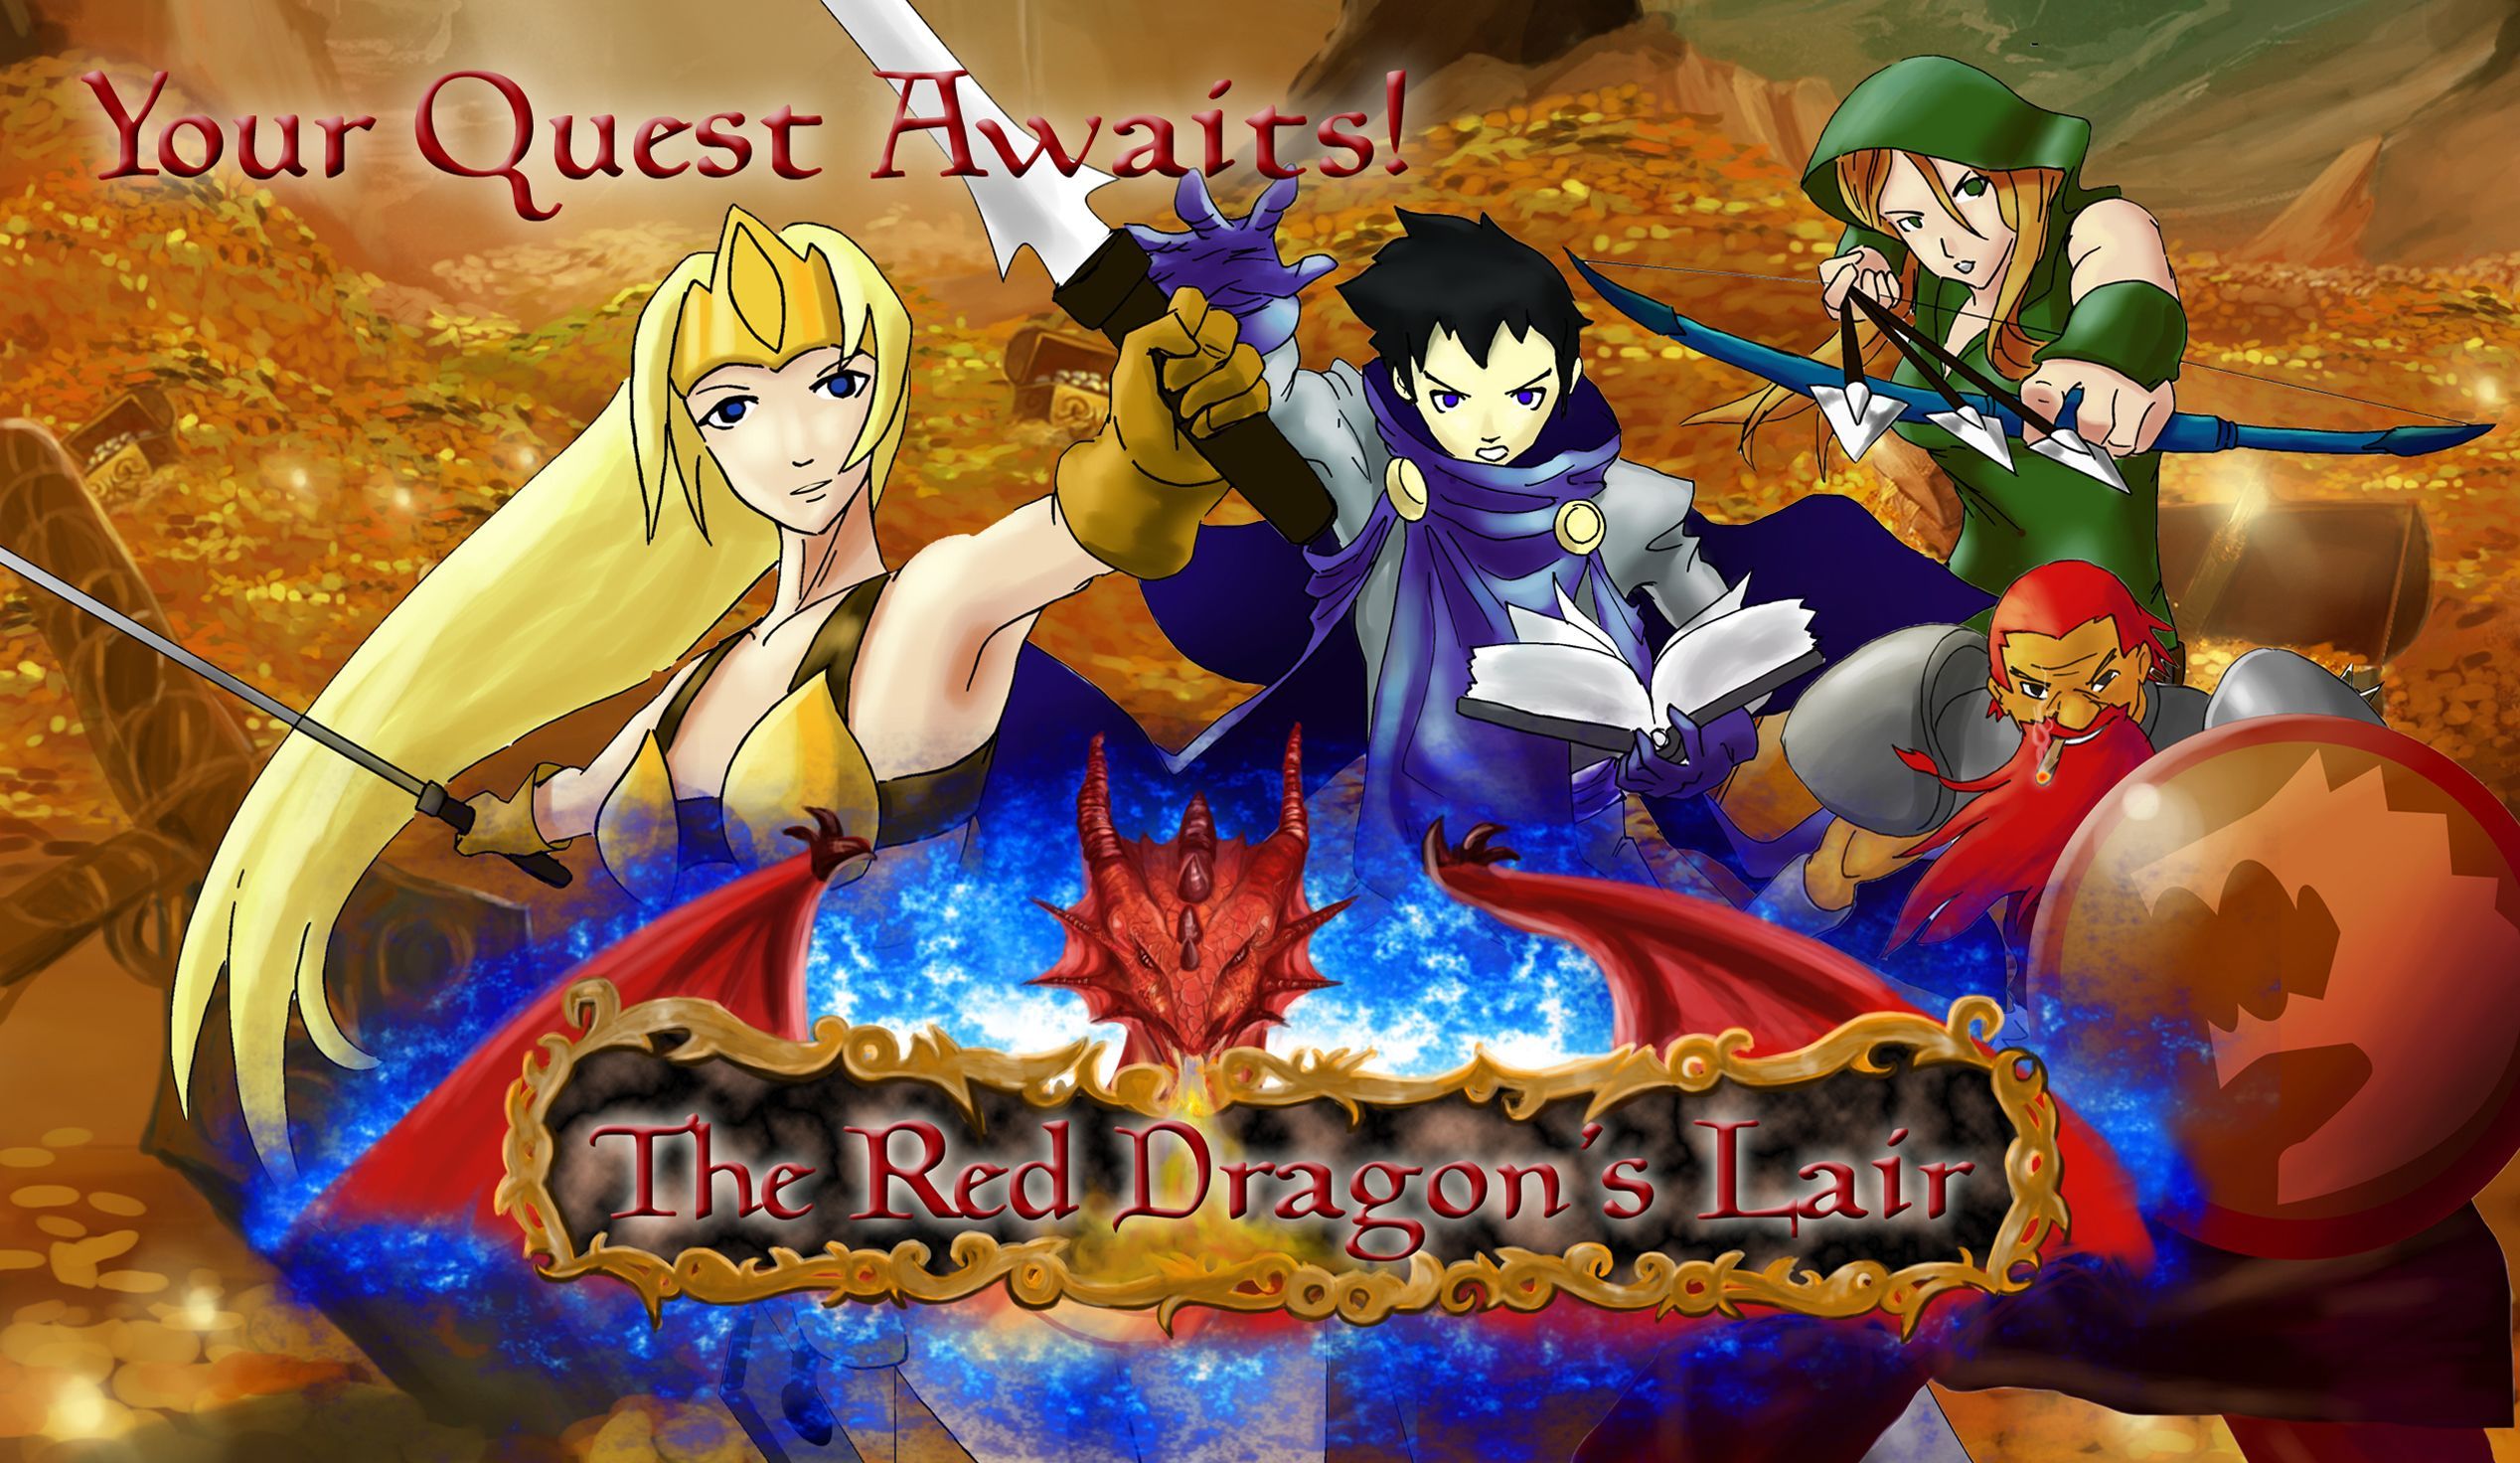 The Red Dragons Lair